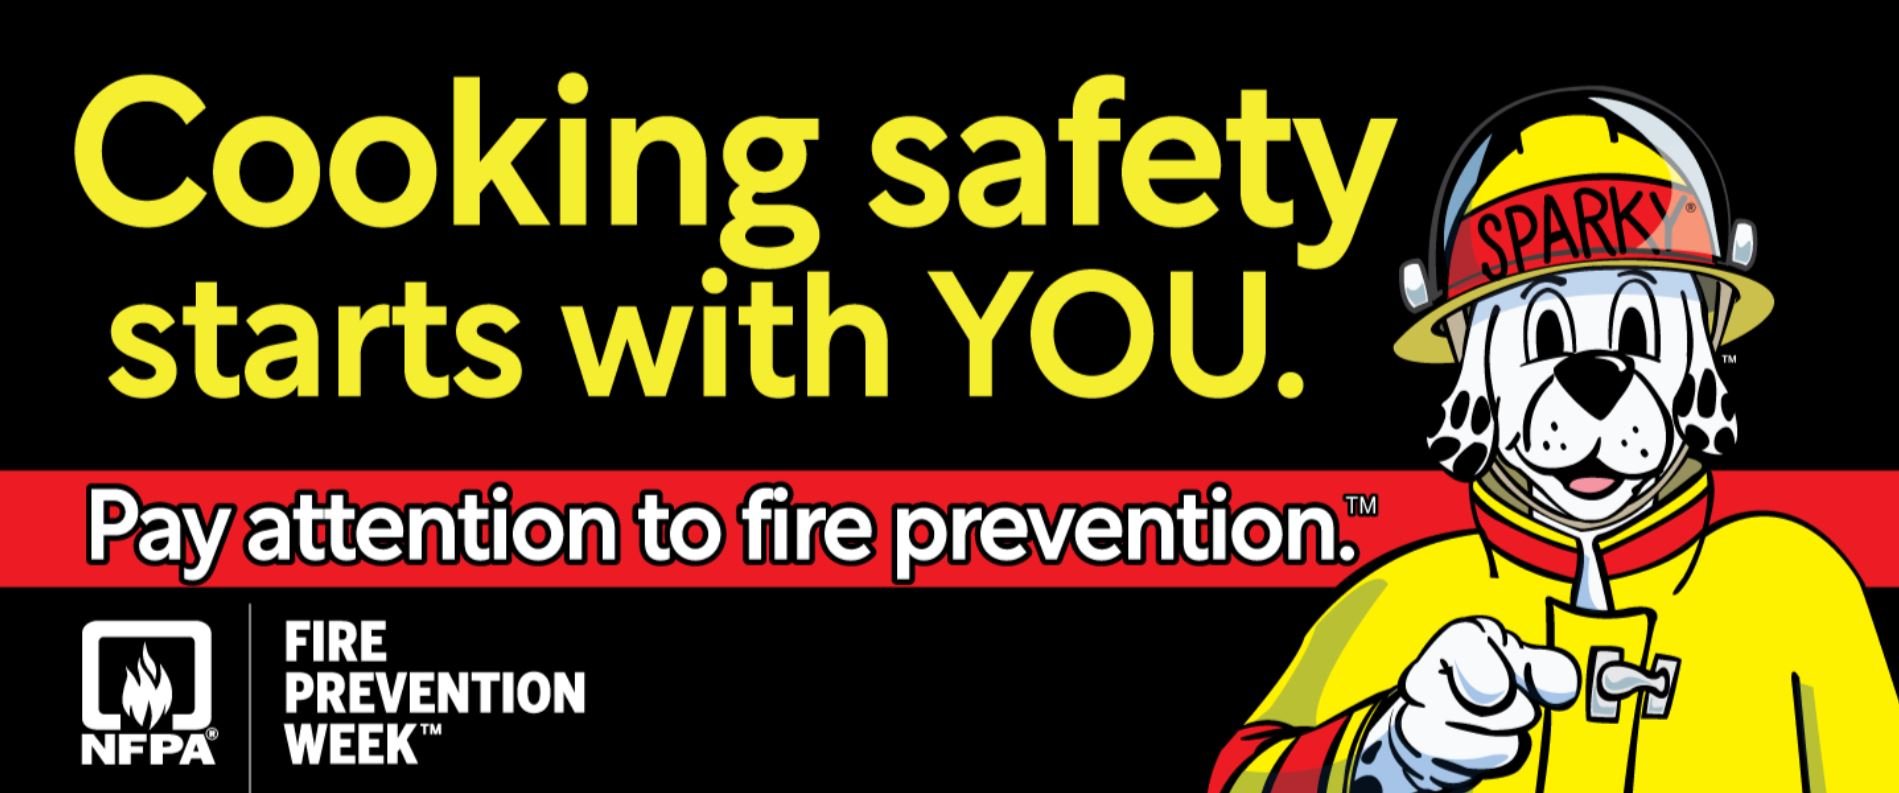 fire-prevention-week image